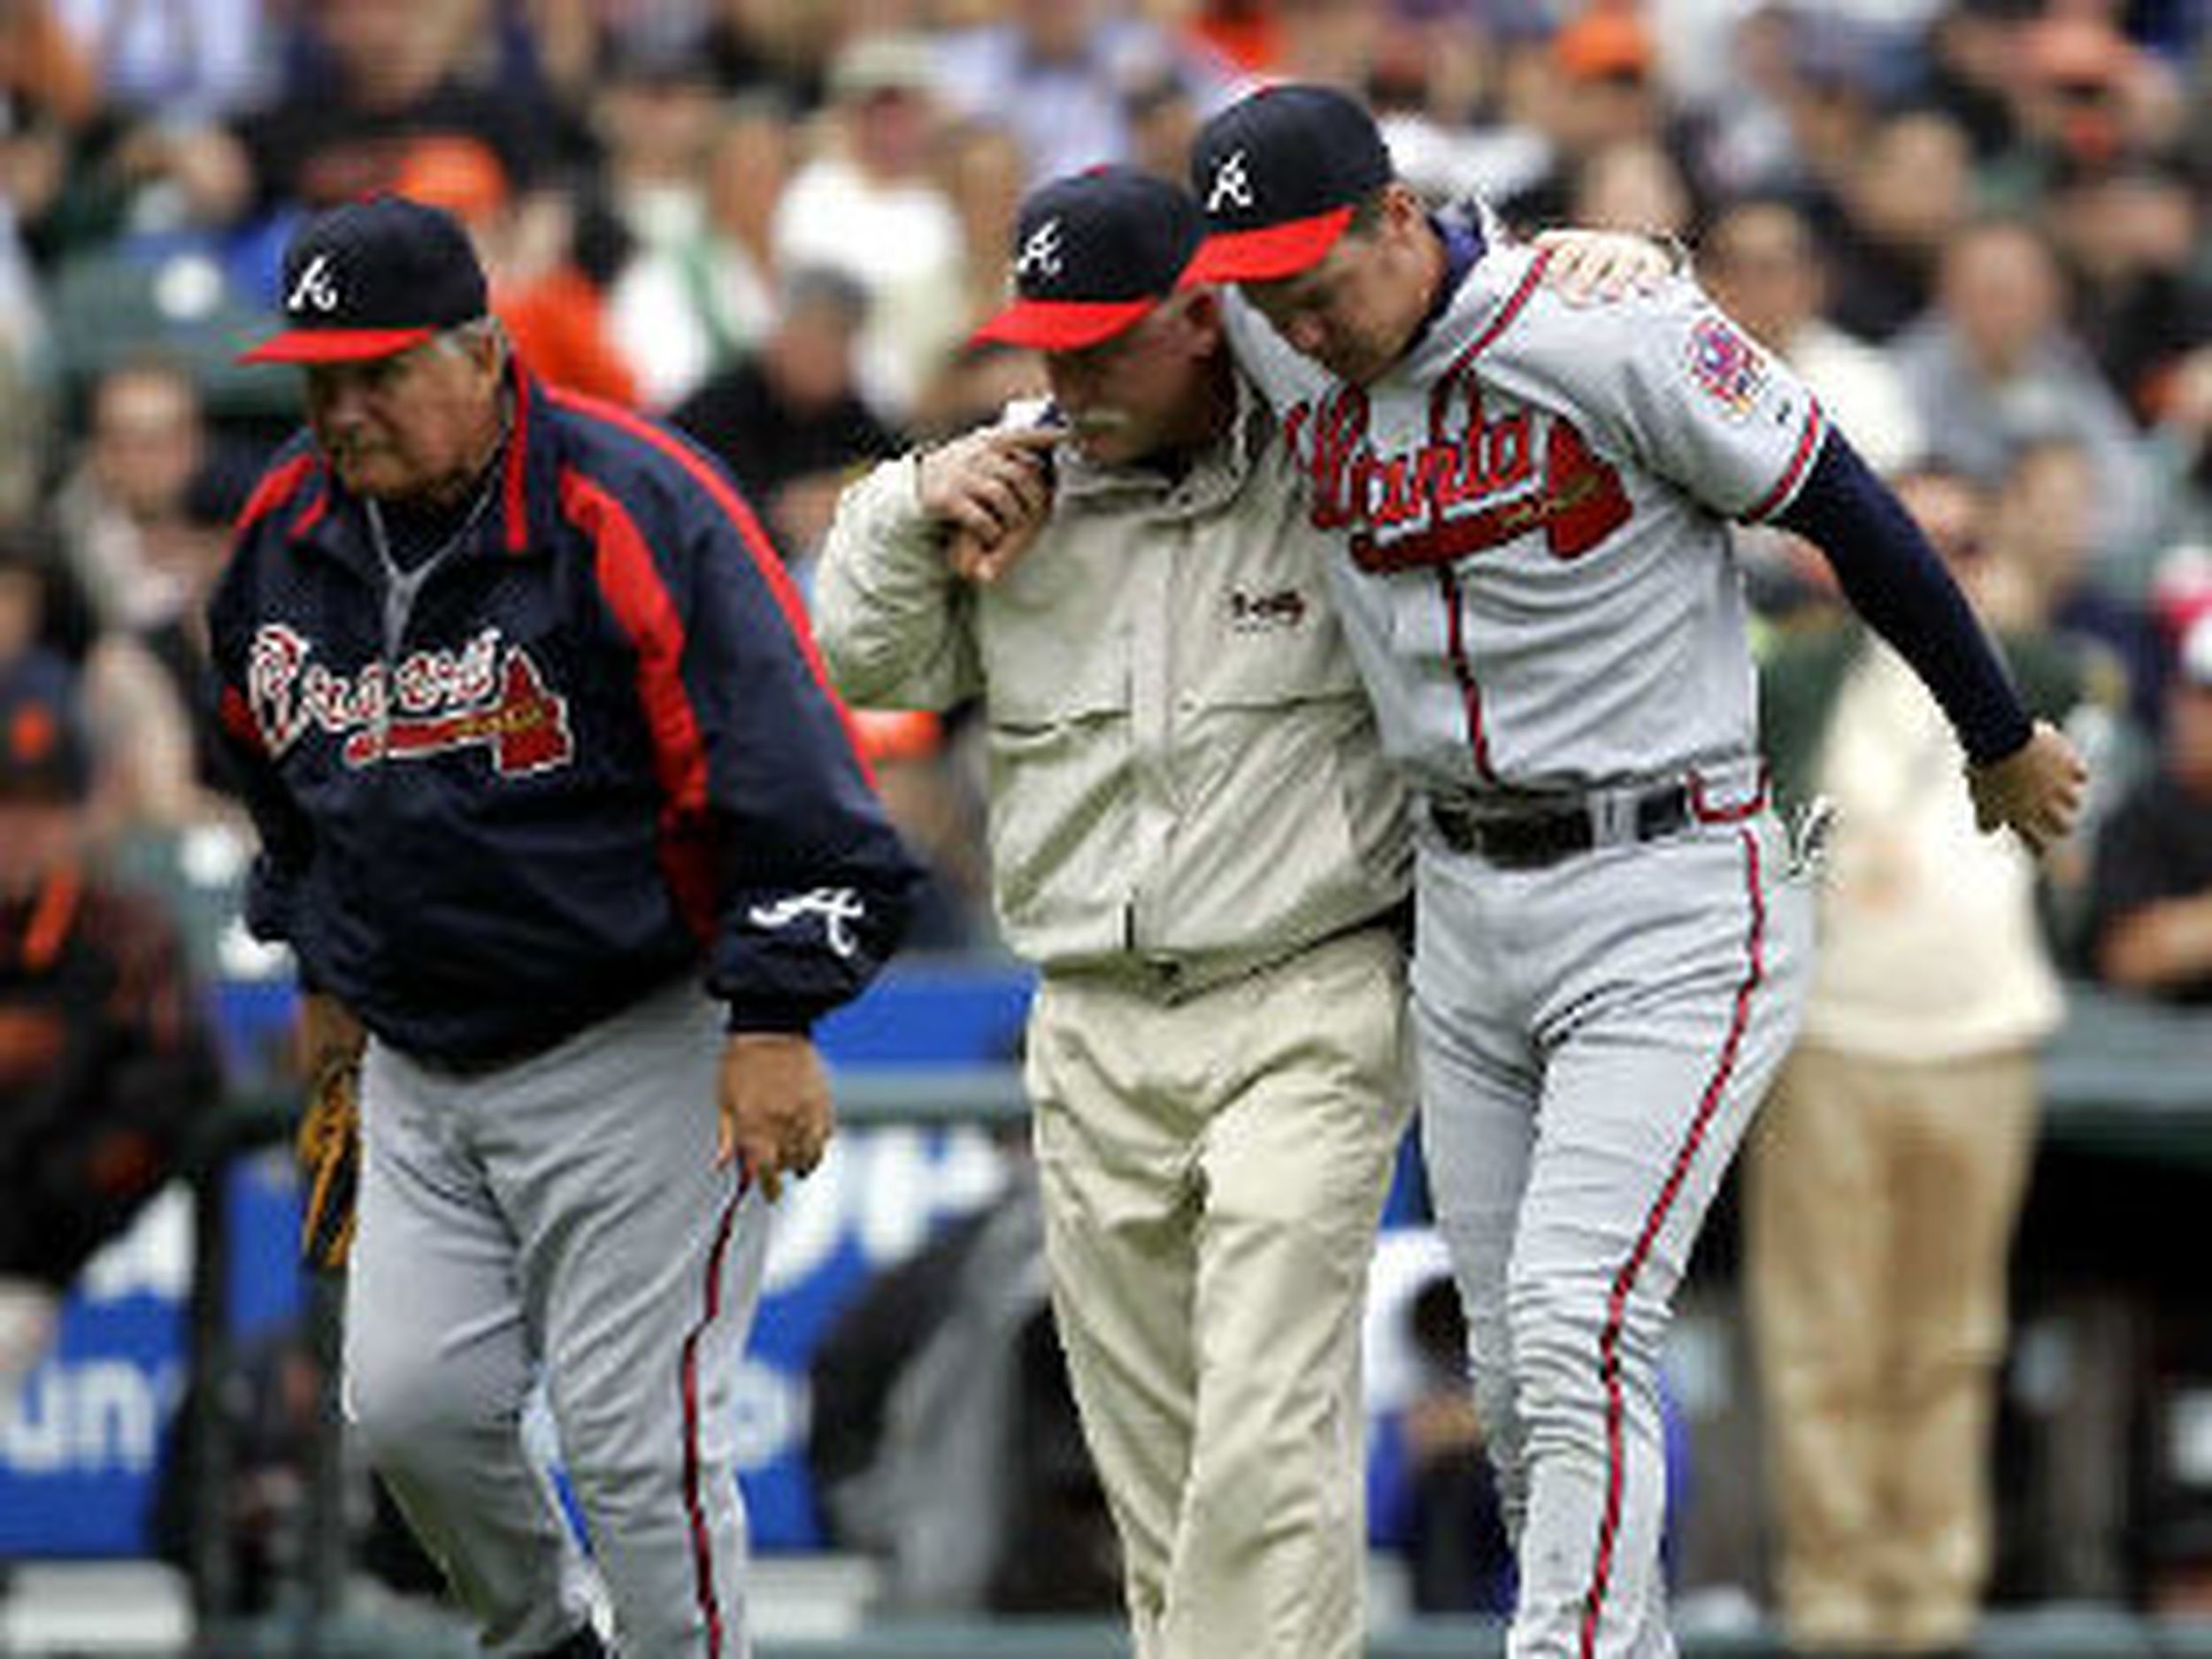 This Day in Braves History: Chipper Jones homers on 40th birthday